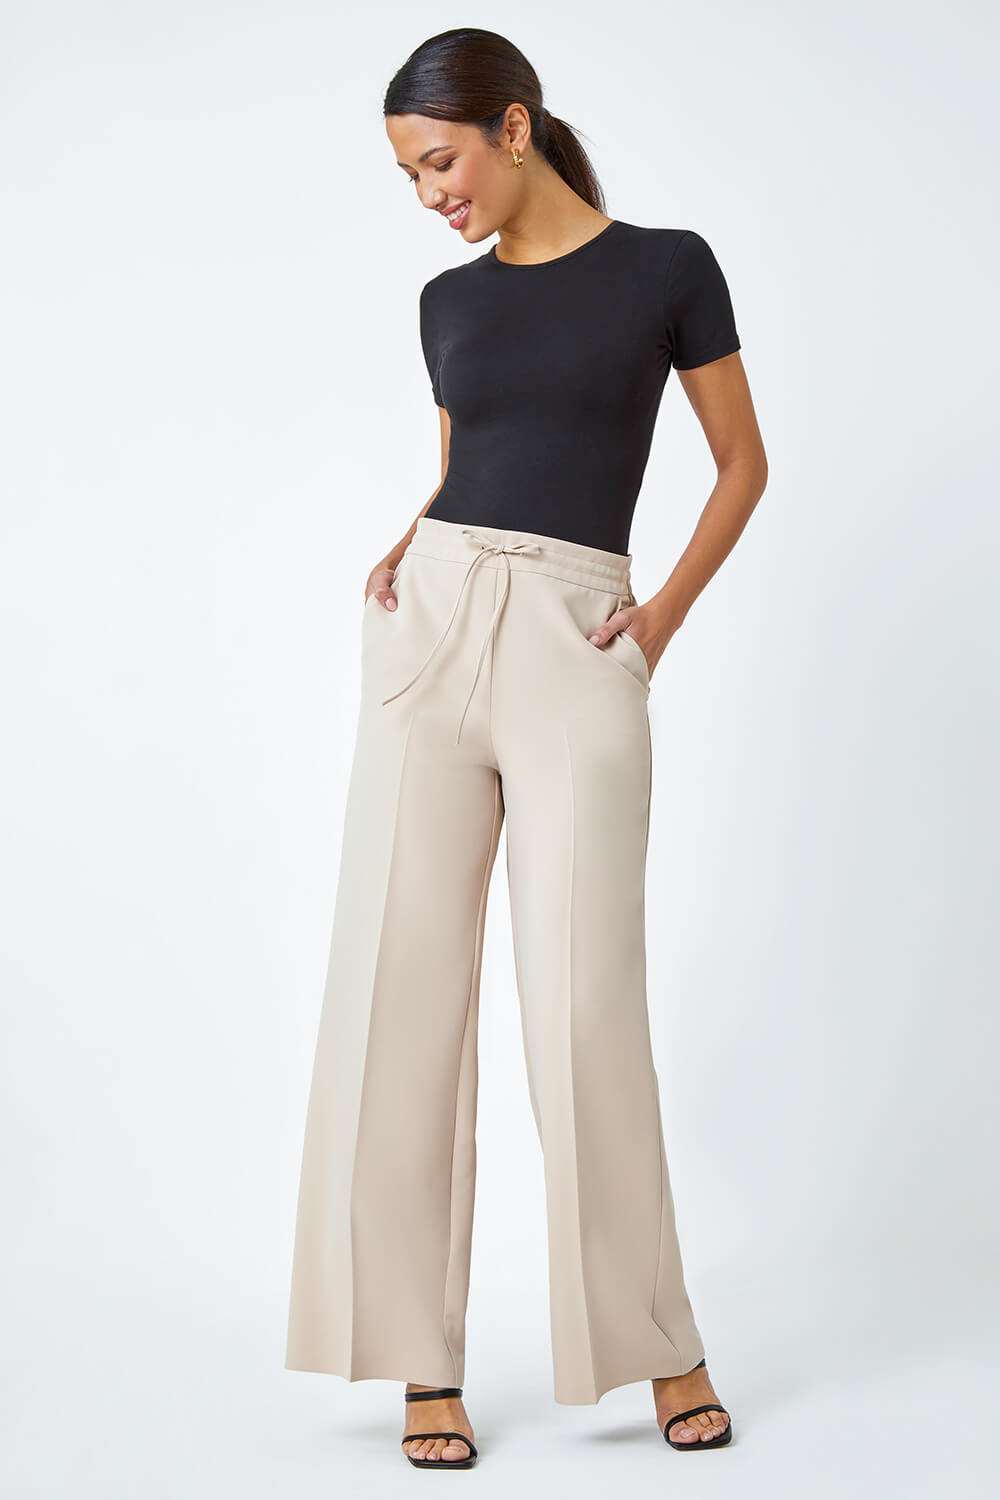 Stone Wide Leg Tie Front Stretch Trouser, Image 2 of 5